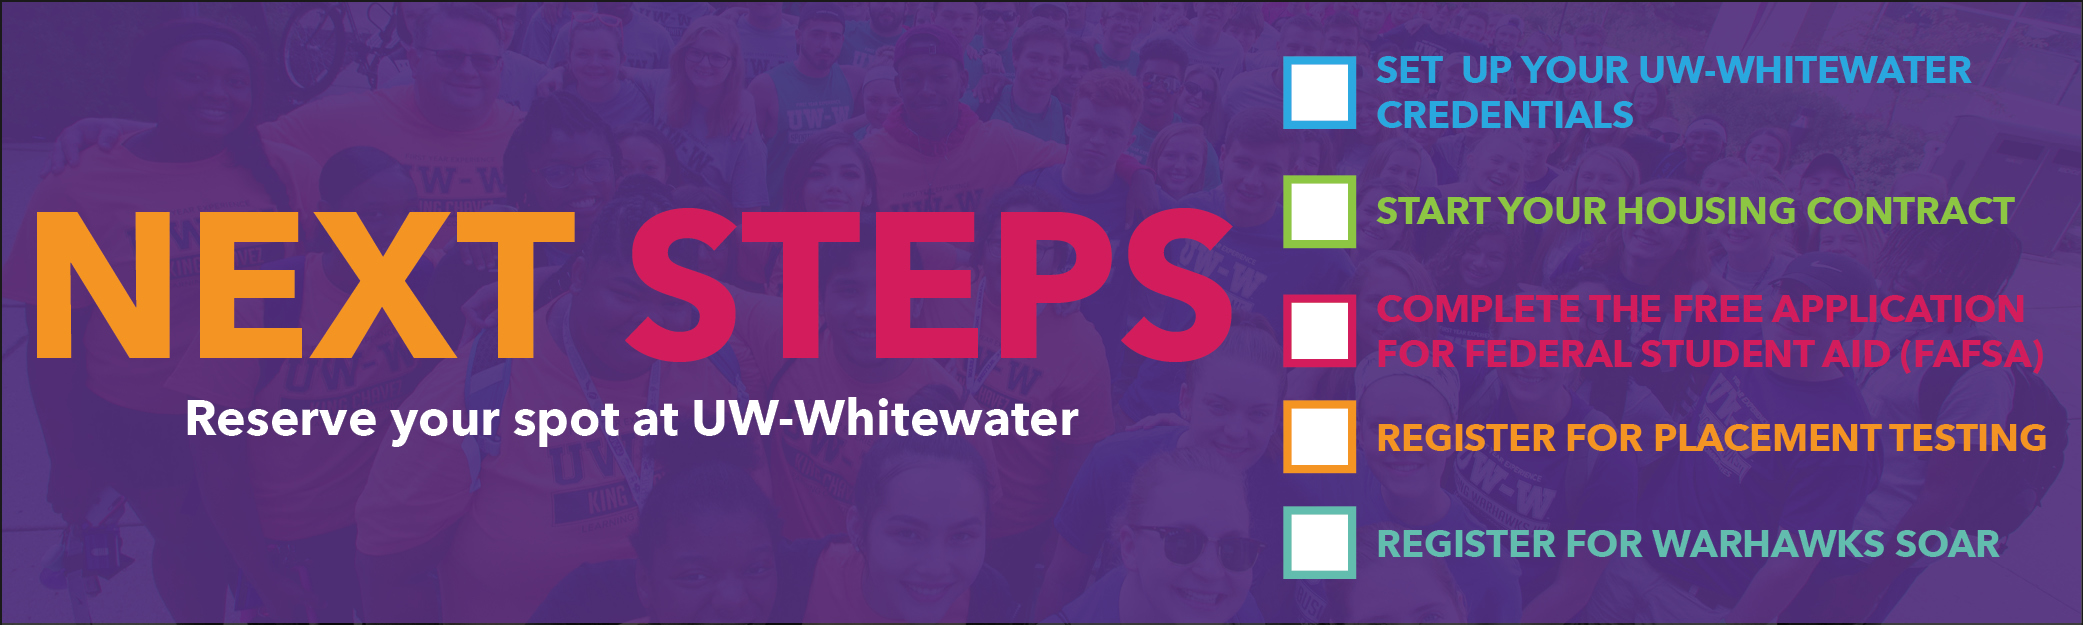 Next Steps: Reserve your spot at UW-Whitewater